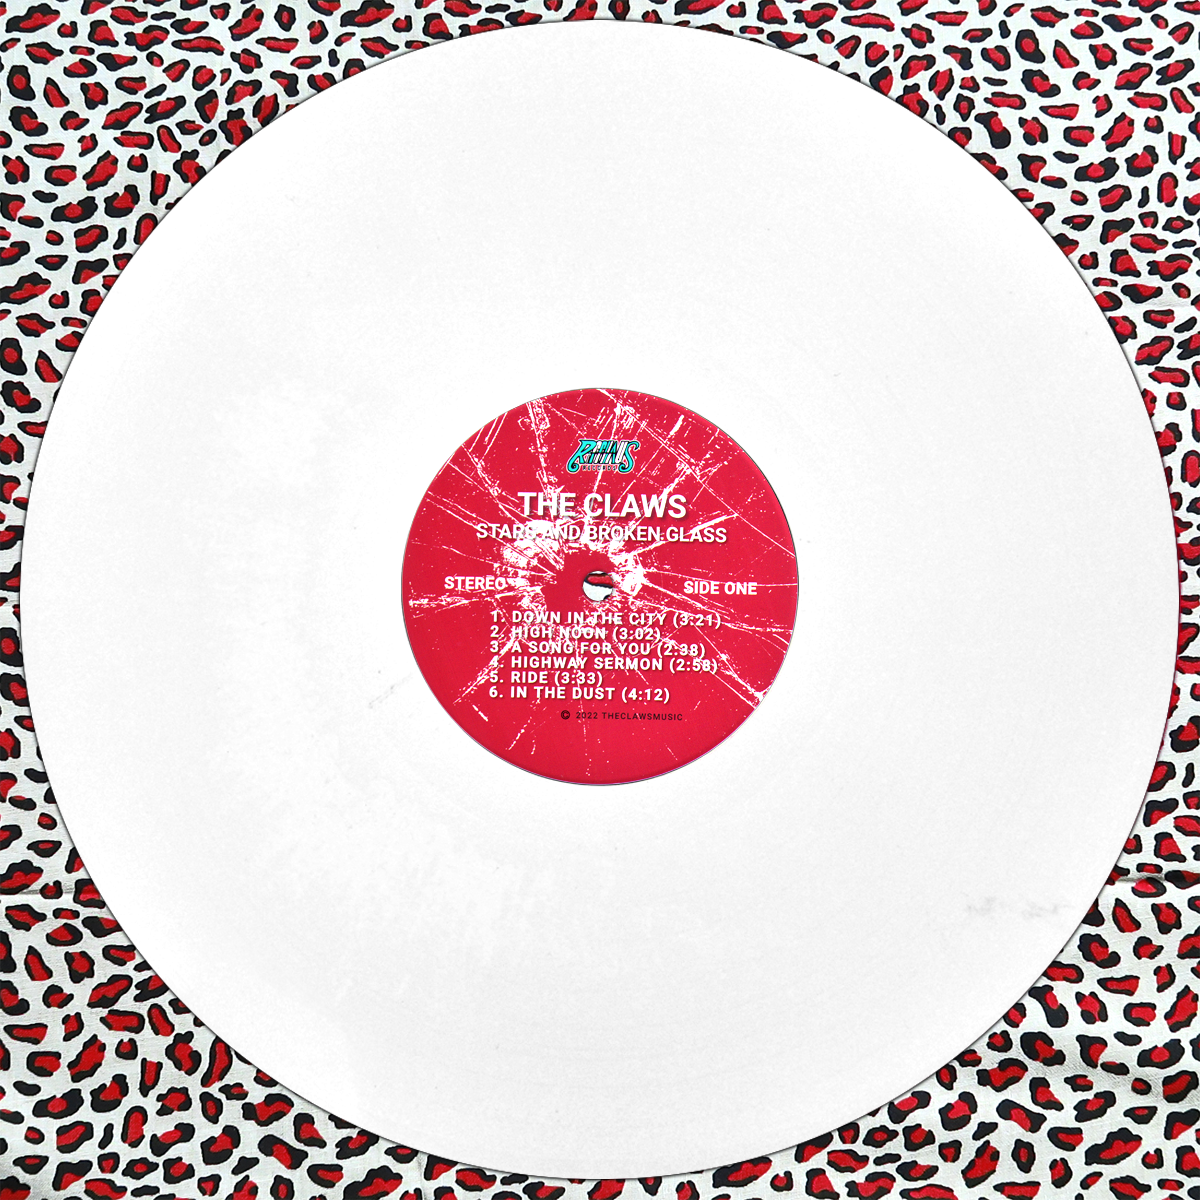 The Claws- Stars And Broken Glass LP ~DEAD BEAT EDITION LTD TO 31 NUMBERED COPIES ON WHITE WAX!